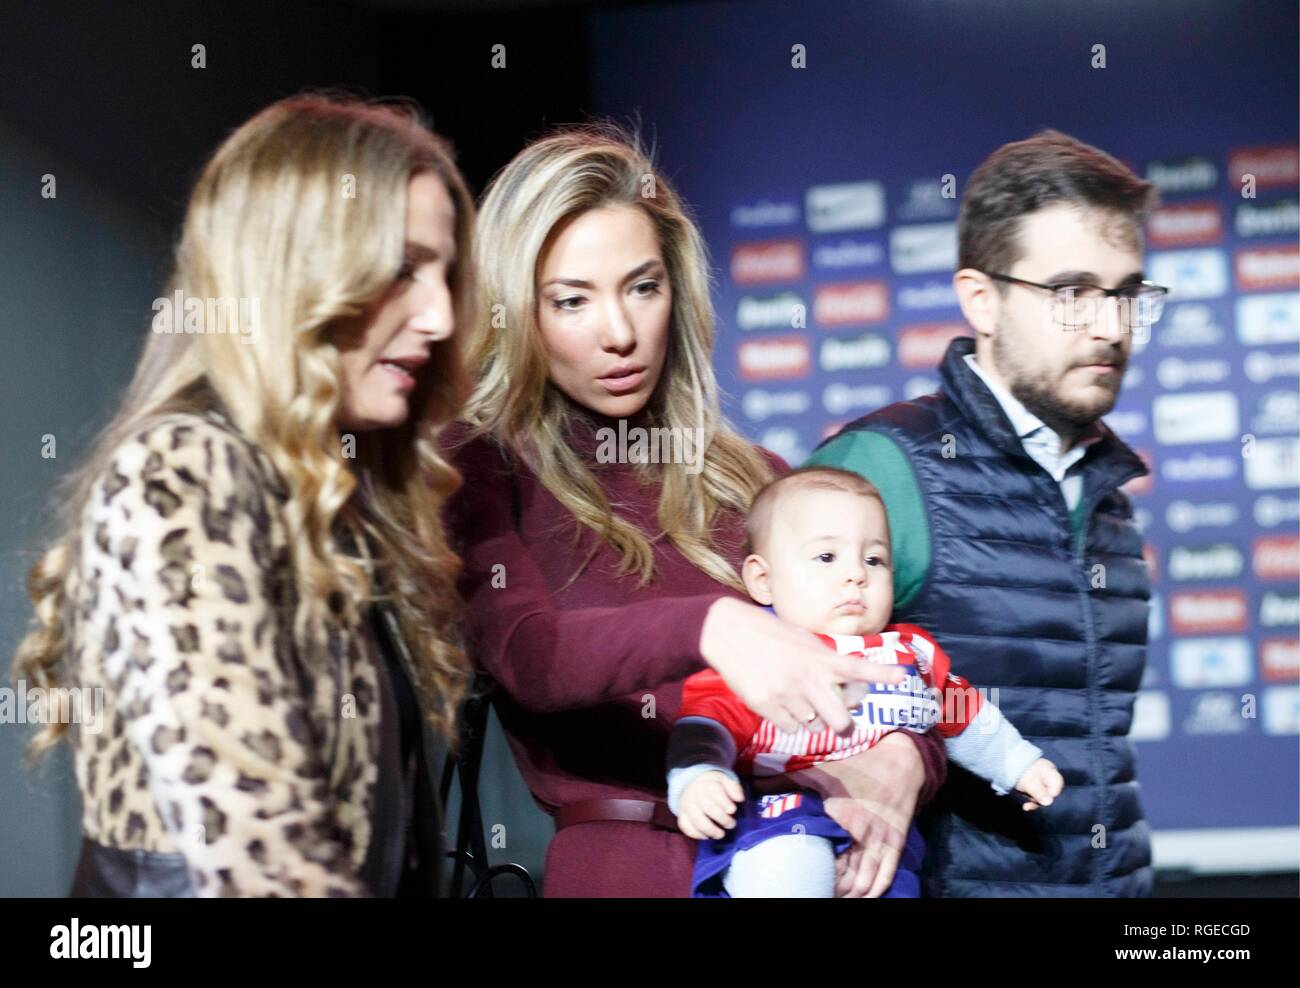 Madrid Spain 29th Jan 2019 Alvaro Morata Wife Alice Campello During His Presentation As New Player Of Atletico Madrid At Wanda Metropolitano Stadium In Madrid On January 29 2019 Photo By Guille